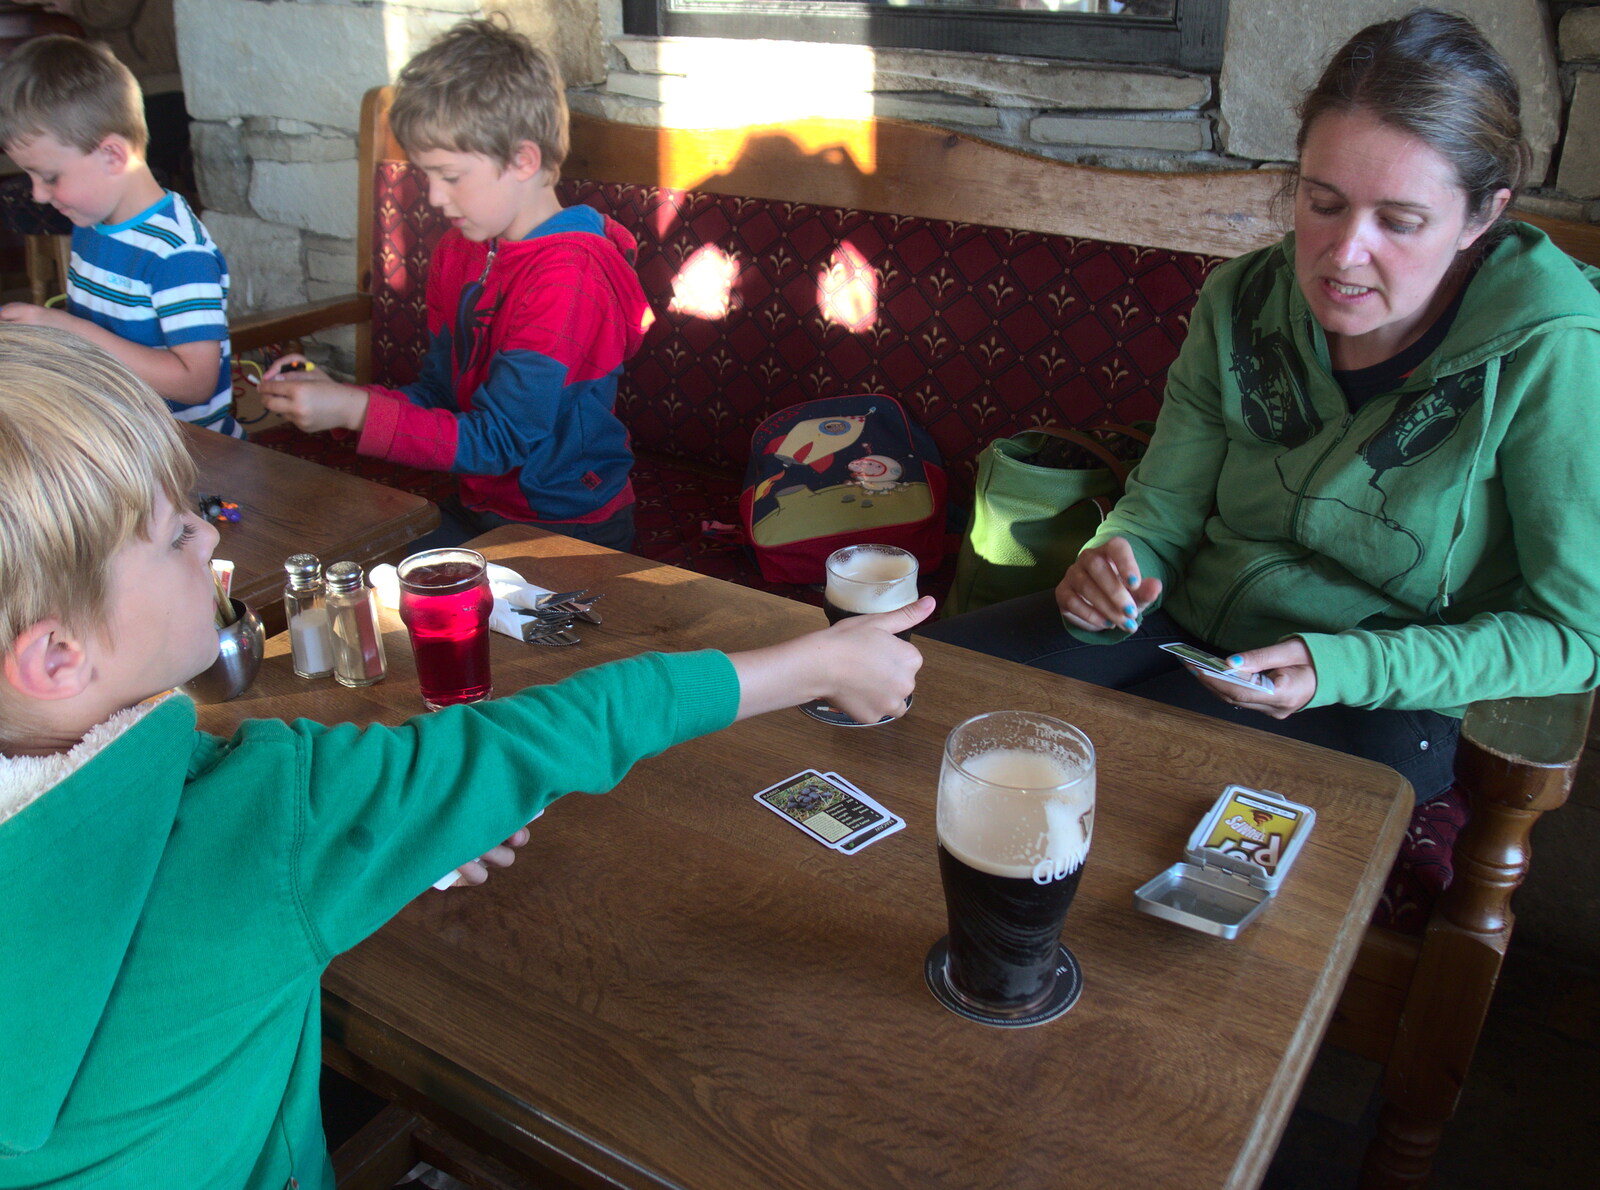 Harry plays Top Trumps with Isobel from Surfing Achill Island, Oileán Acla, Maigh Eo, Ireland - 8th August 2017